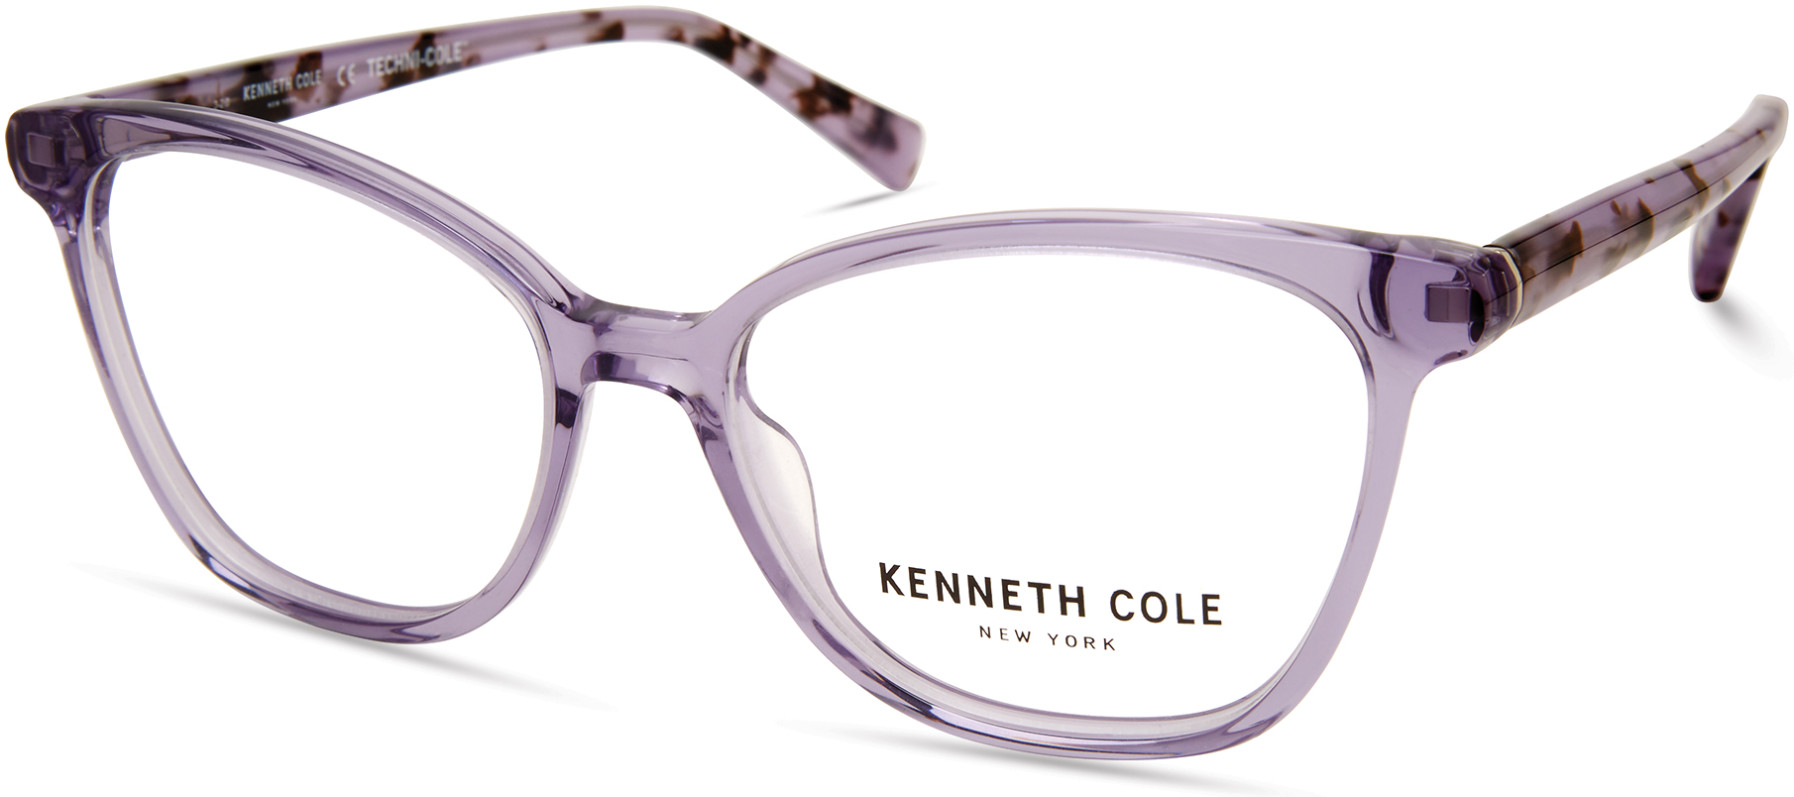 KENNETH COLE NY 0327 081